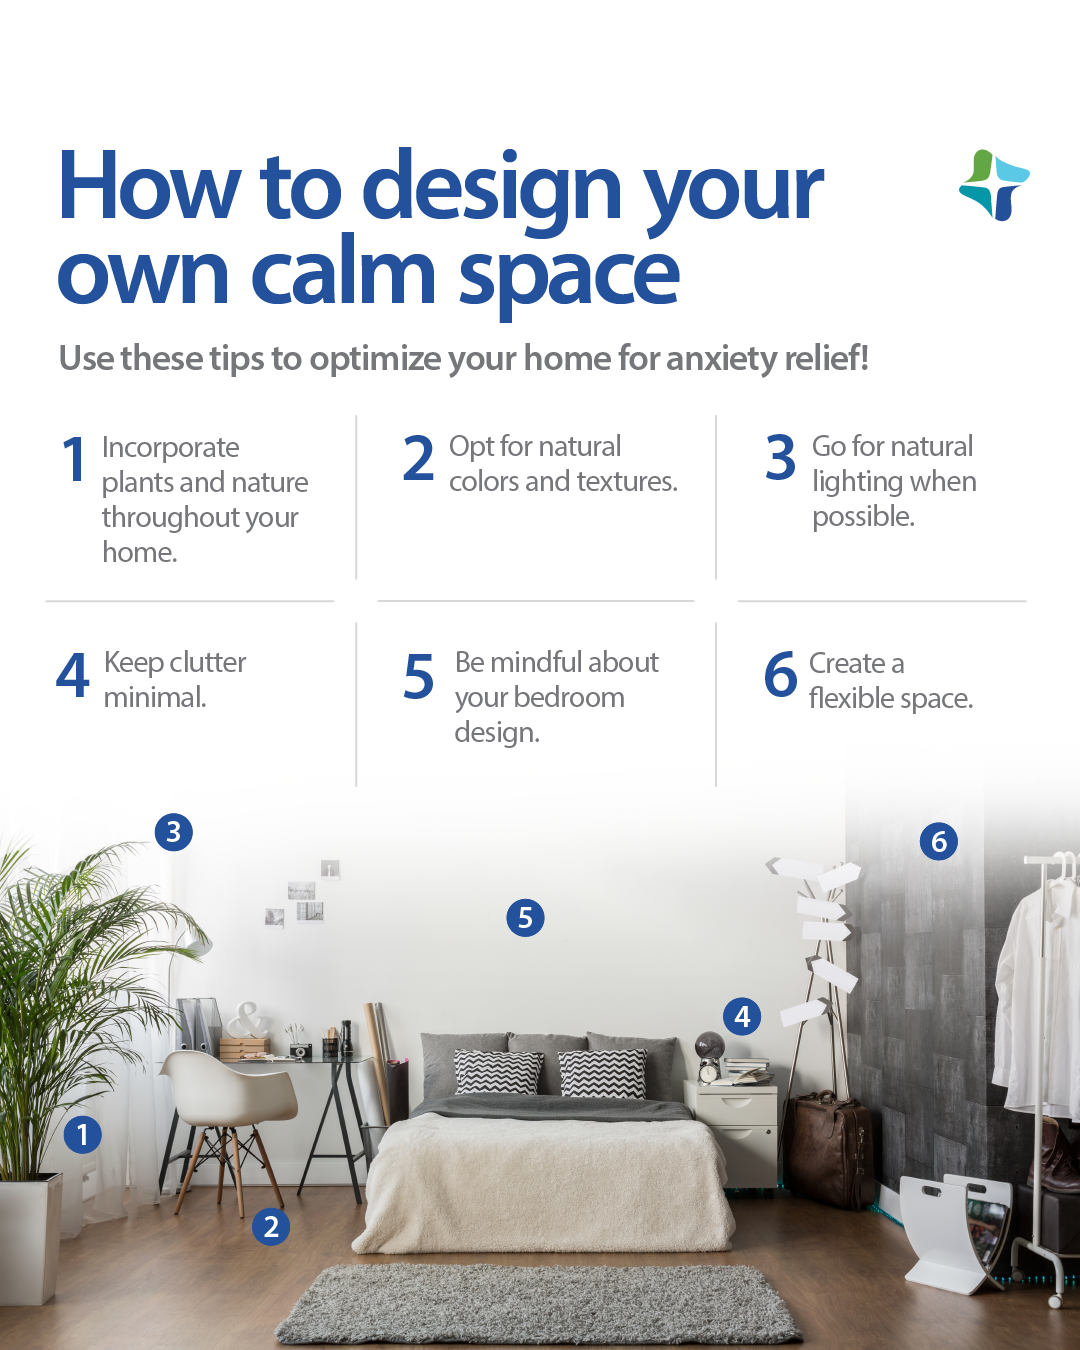 6 ways to optimize your home for anxiety relief